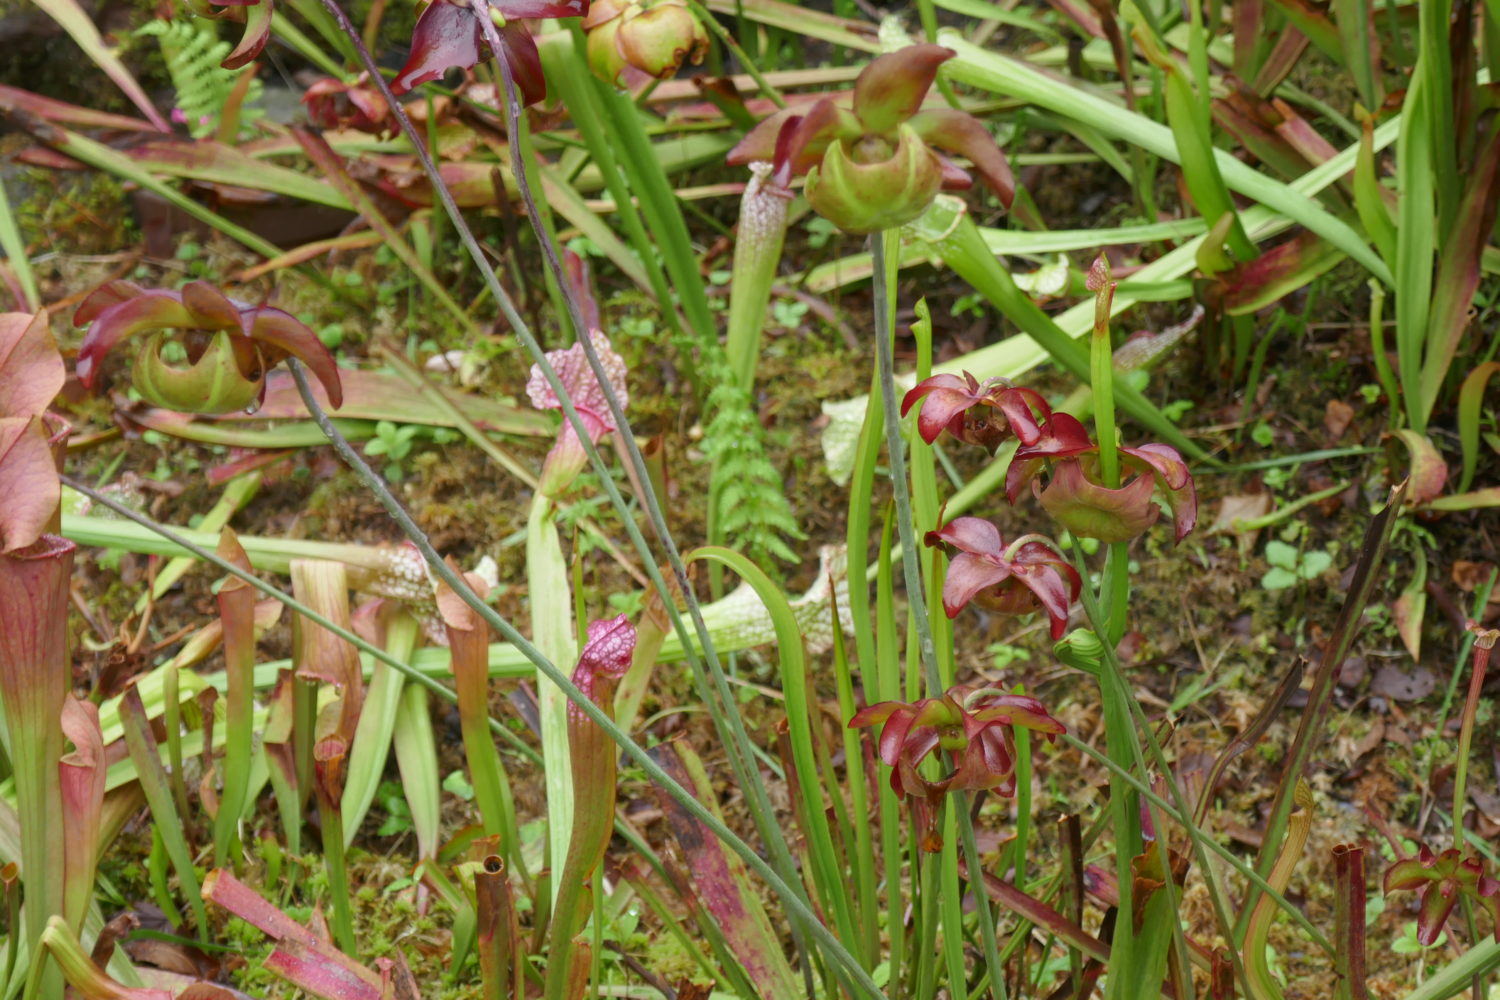 Carniverous plant section in the display garden